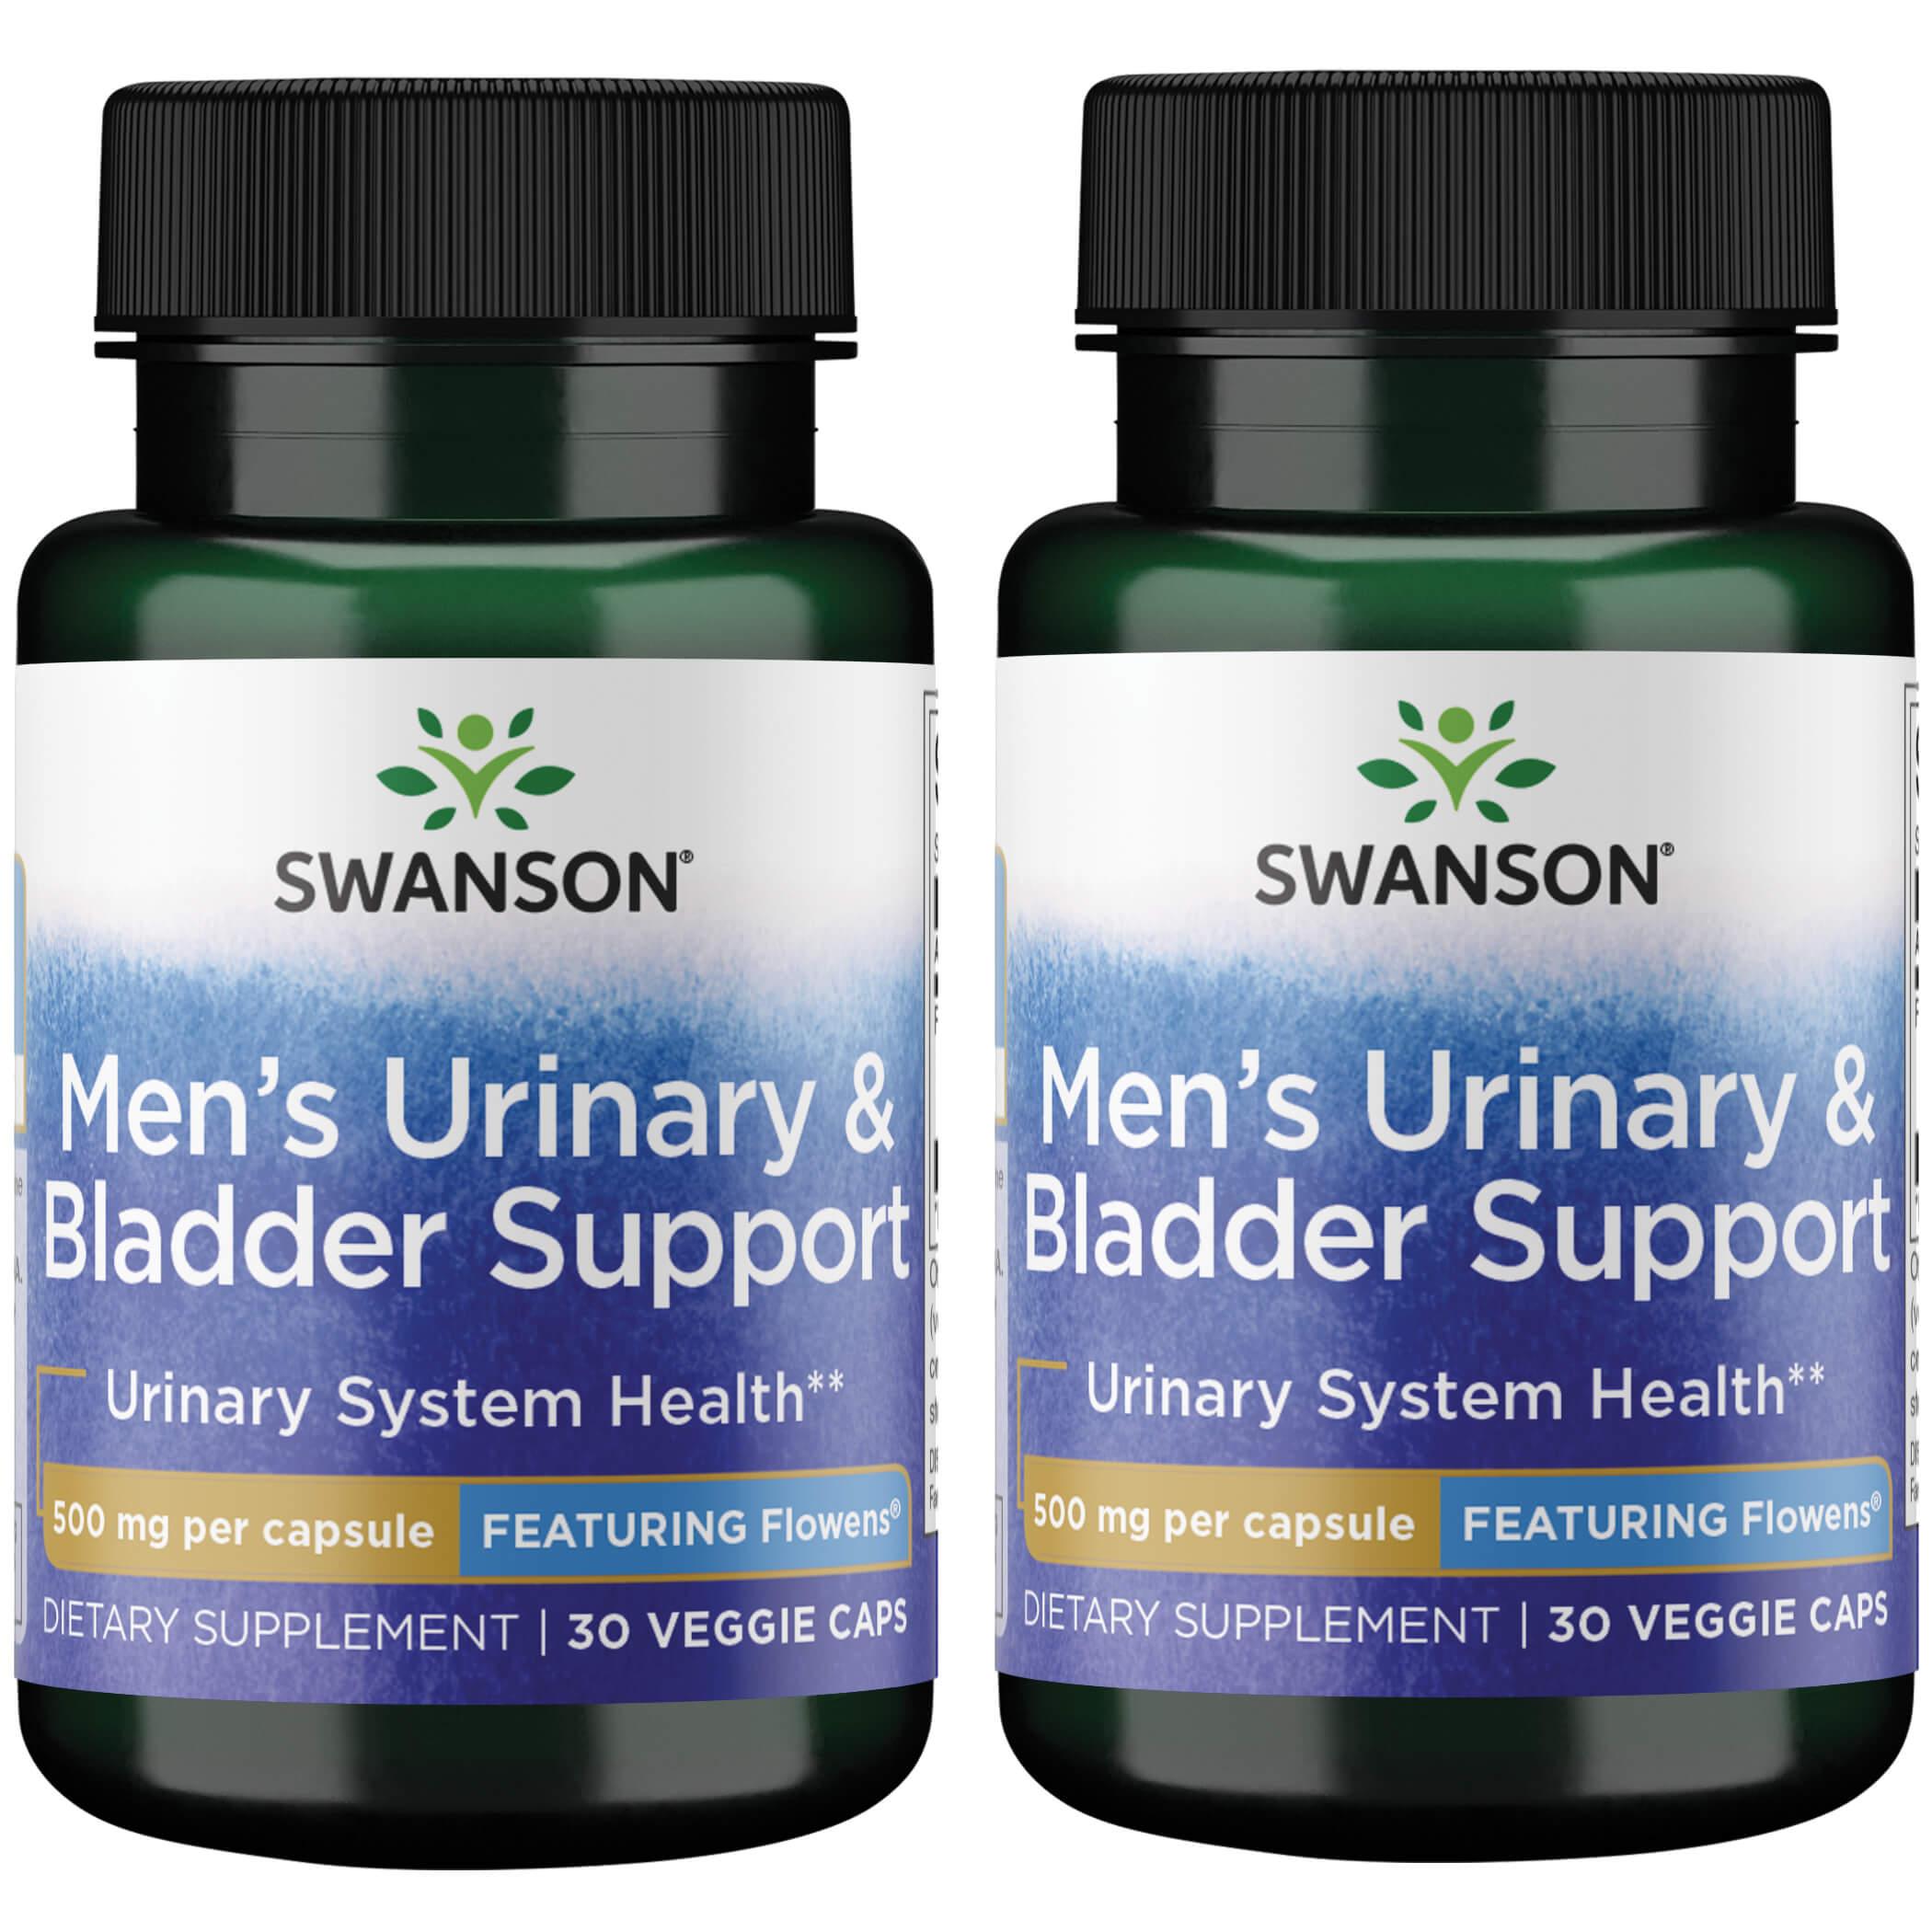 Swanson Premium Mens Urinary and Bladder Support - Featuring Flowens 2 Pack Vitamin 500 mg 30 Veg Caps Prostate Health